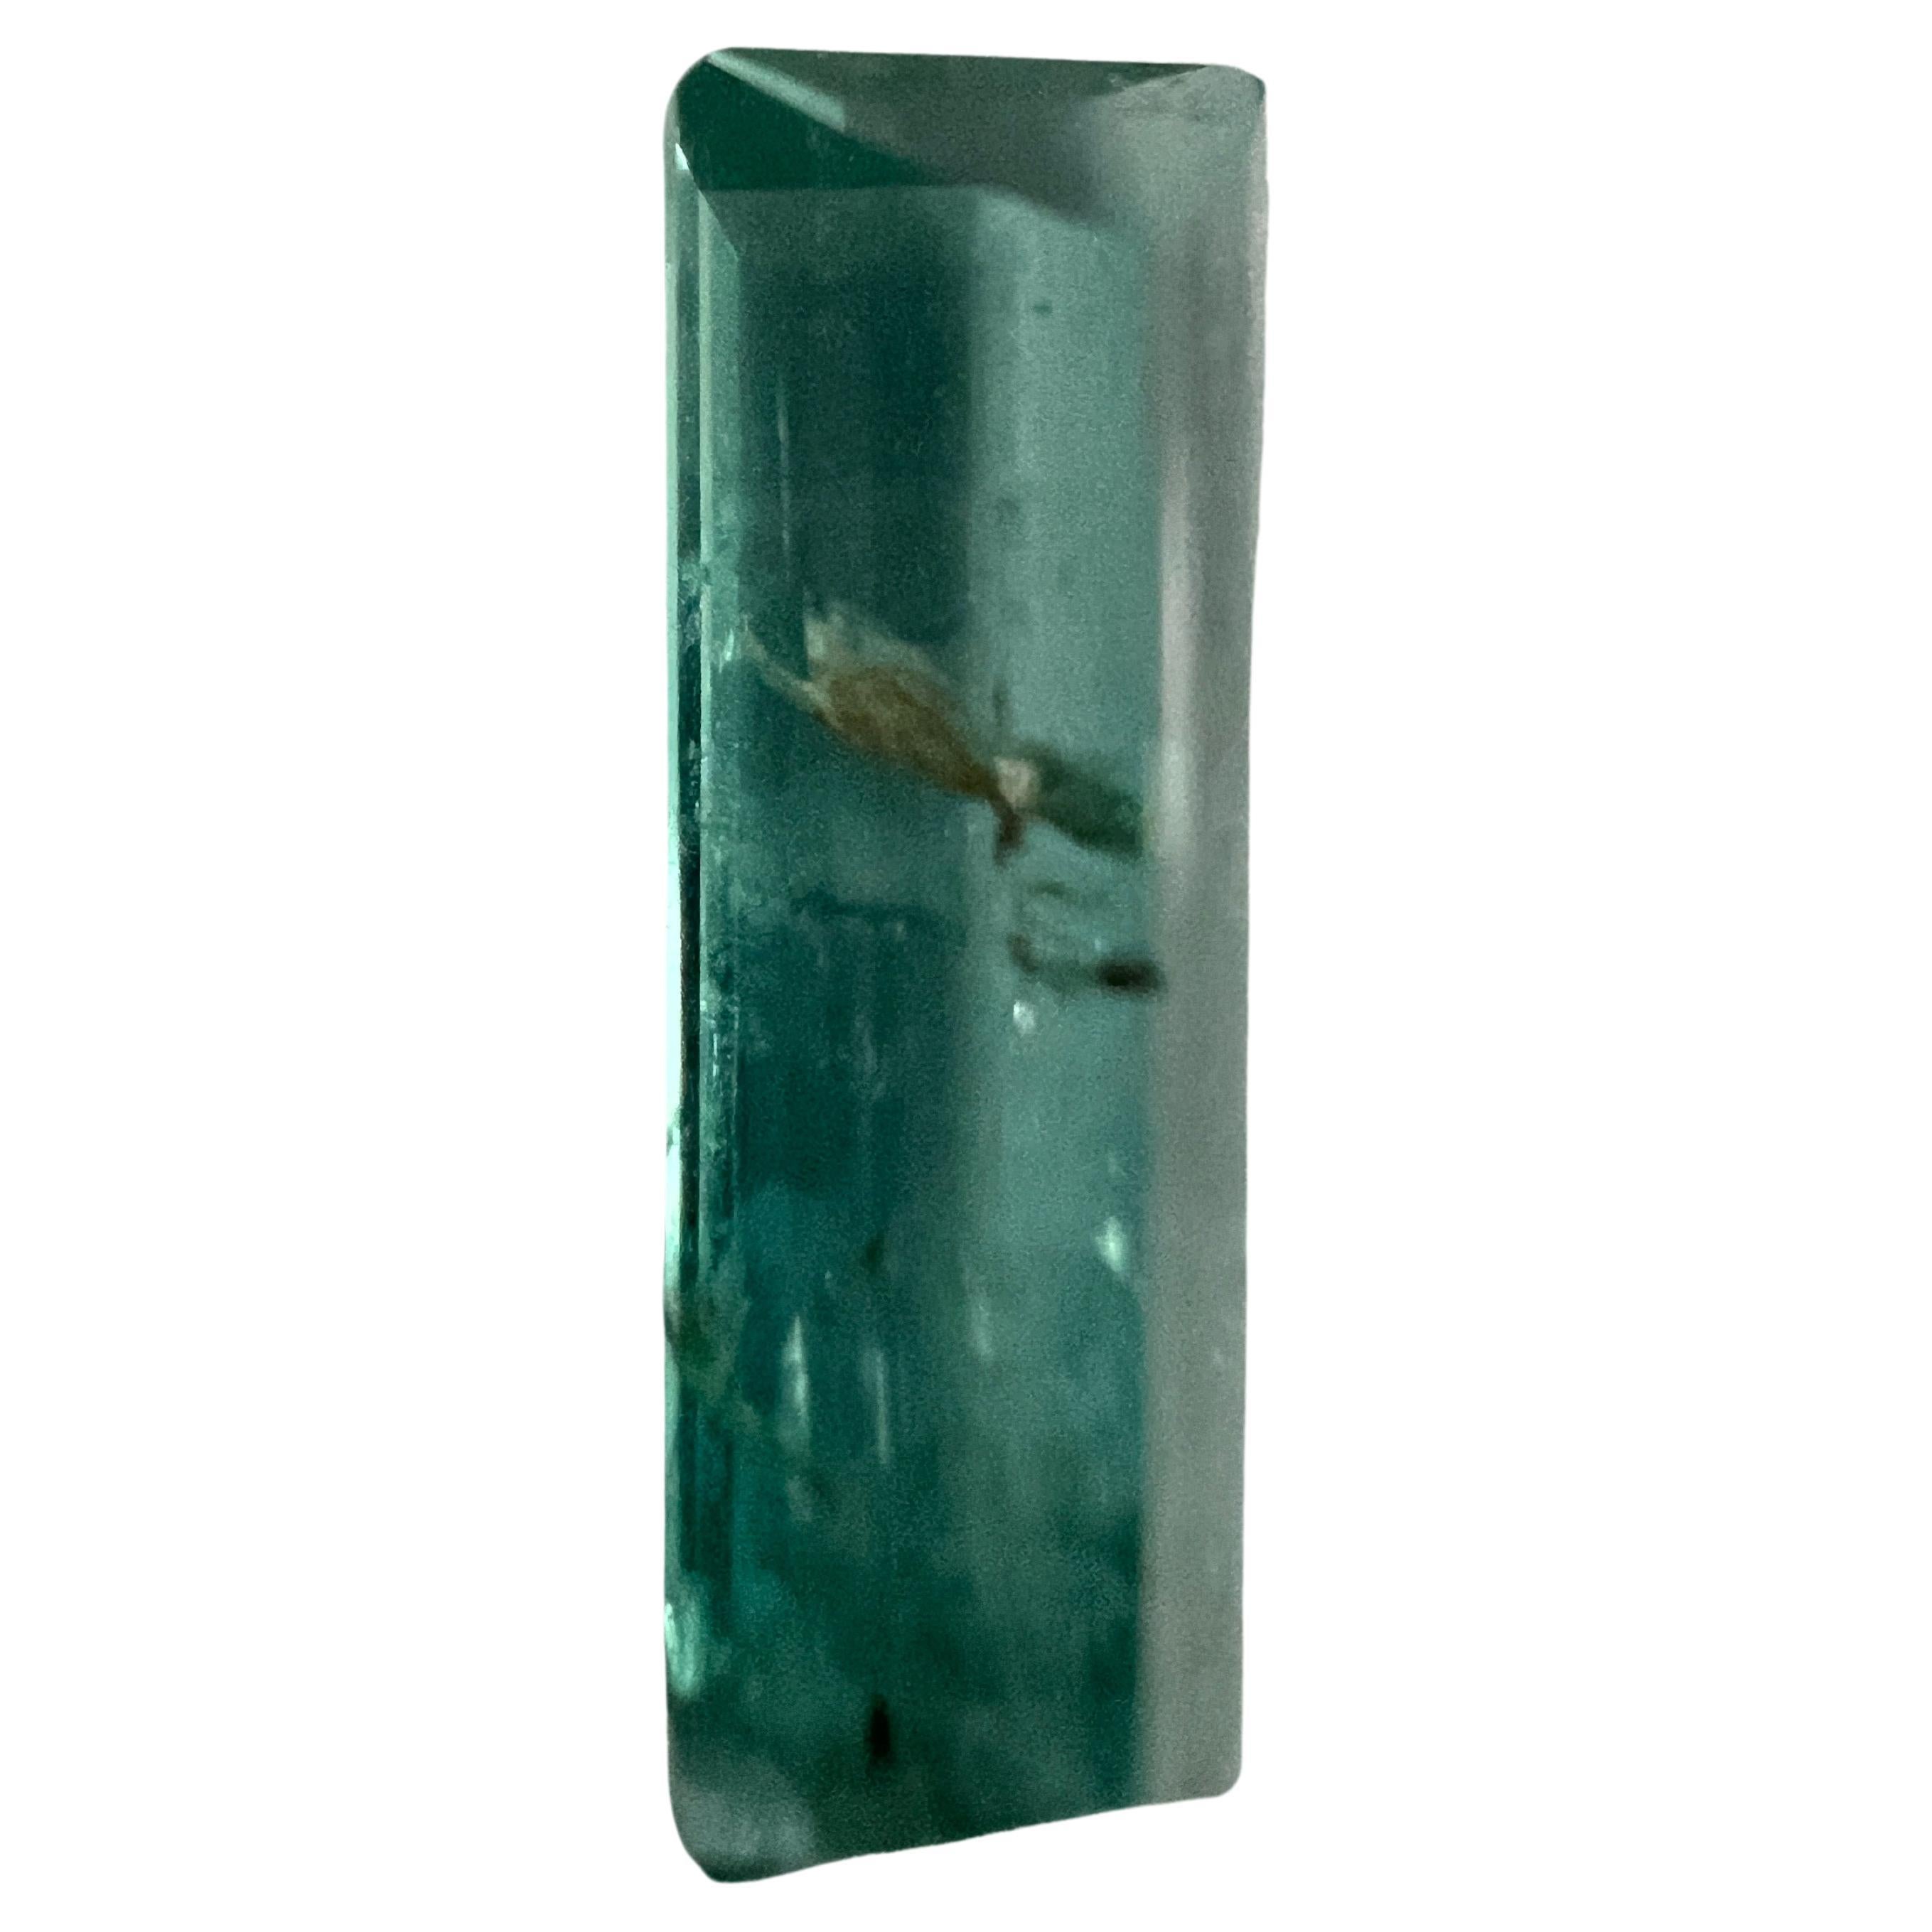 Discover the pure elegance of our 3.65ct Non-oiled Rectangle Cut Natural Emerald Gemstone. This exceptional gemstone radiates a deep, lush green, reminiscent of the richest foliage. Expertly fashioned in a sophisticated rectangle cut, it showcases a